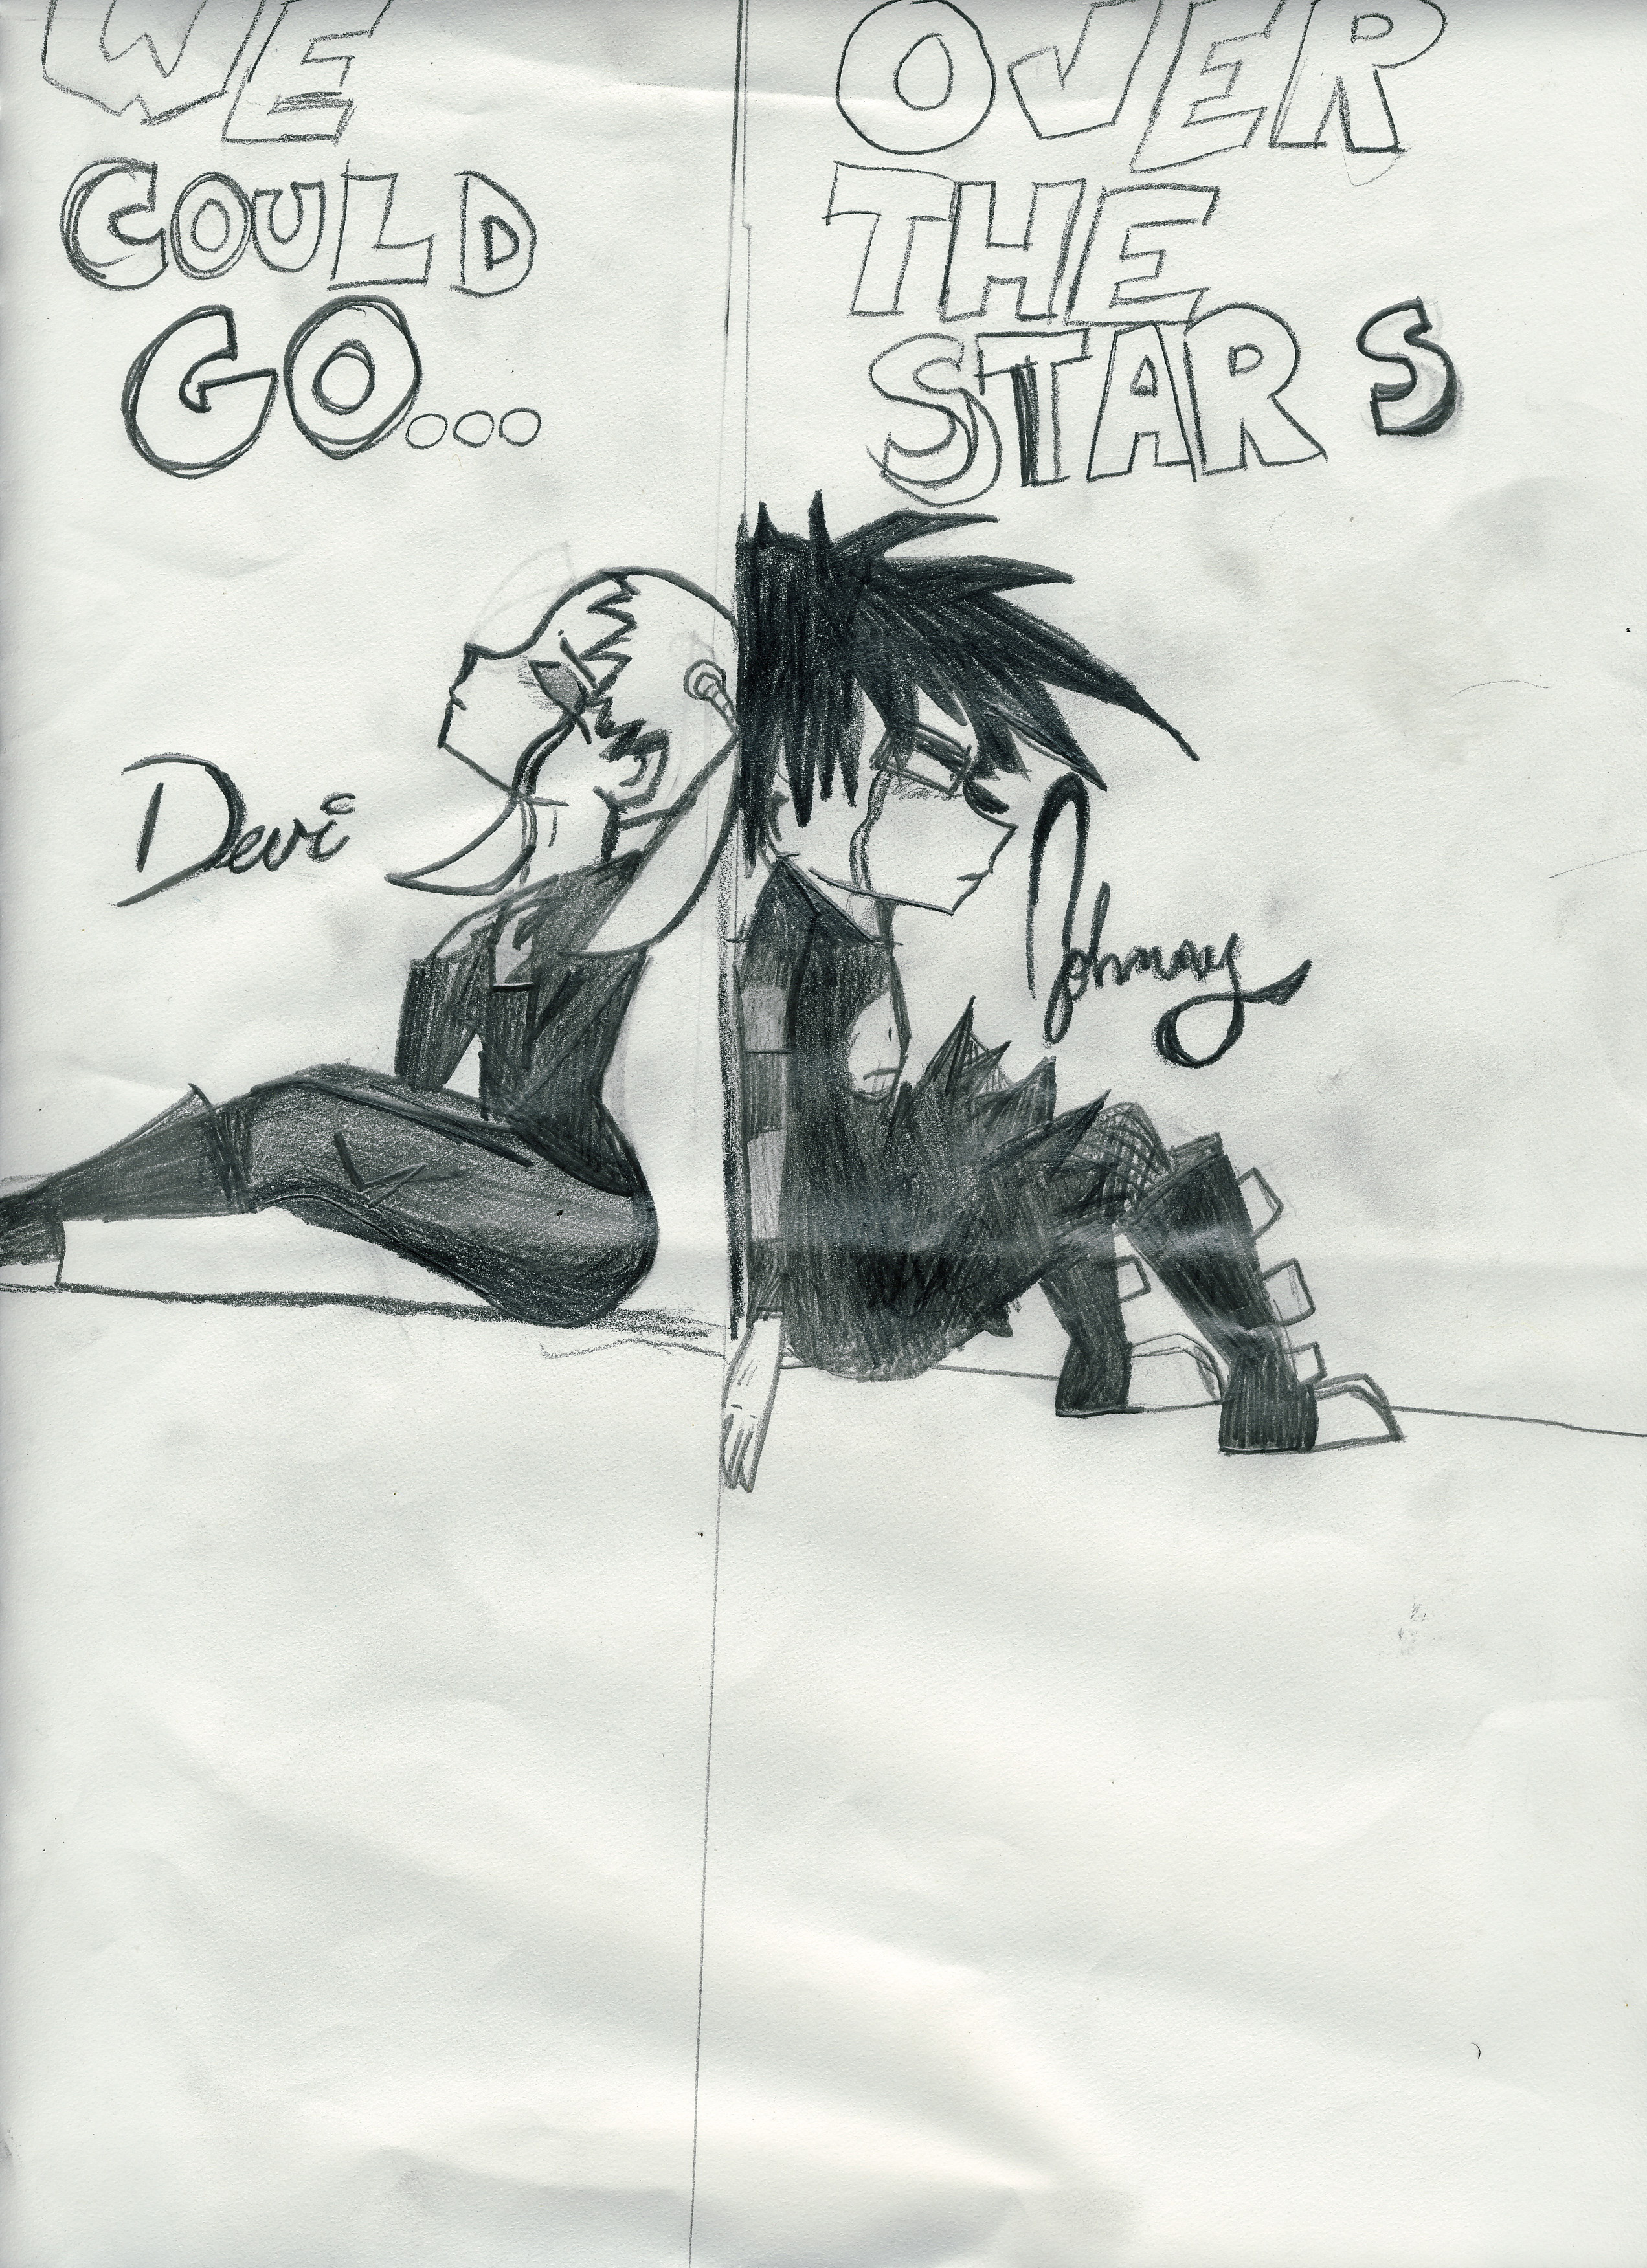 Johnny and Devi: Over the stars by inuchibi